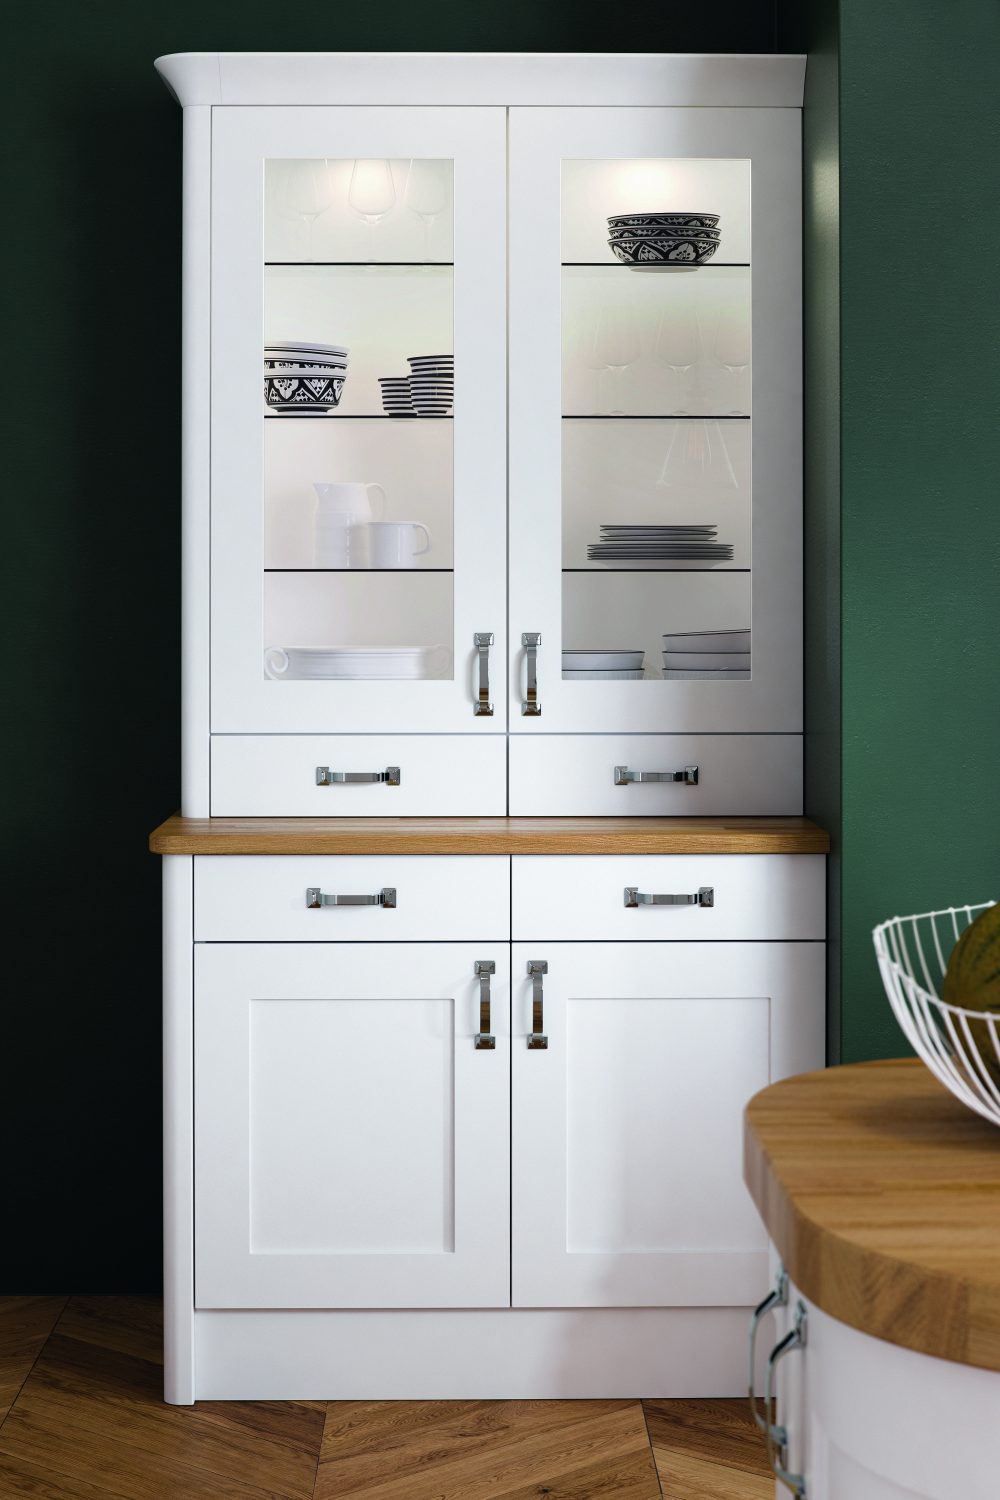 White Olympia shaker kitchen units are displayed in this dresser. The dresser has glass fronts on top, showcasing plates and bowls that are stored away neatly. The bottom half of the dresser has two top drawers and two cupboard doors underneath. The handles are chrome.